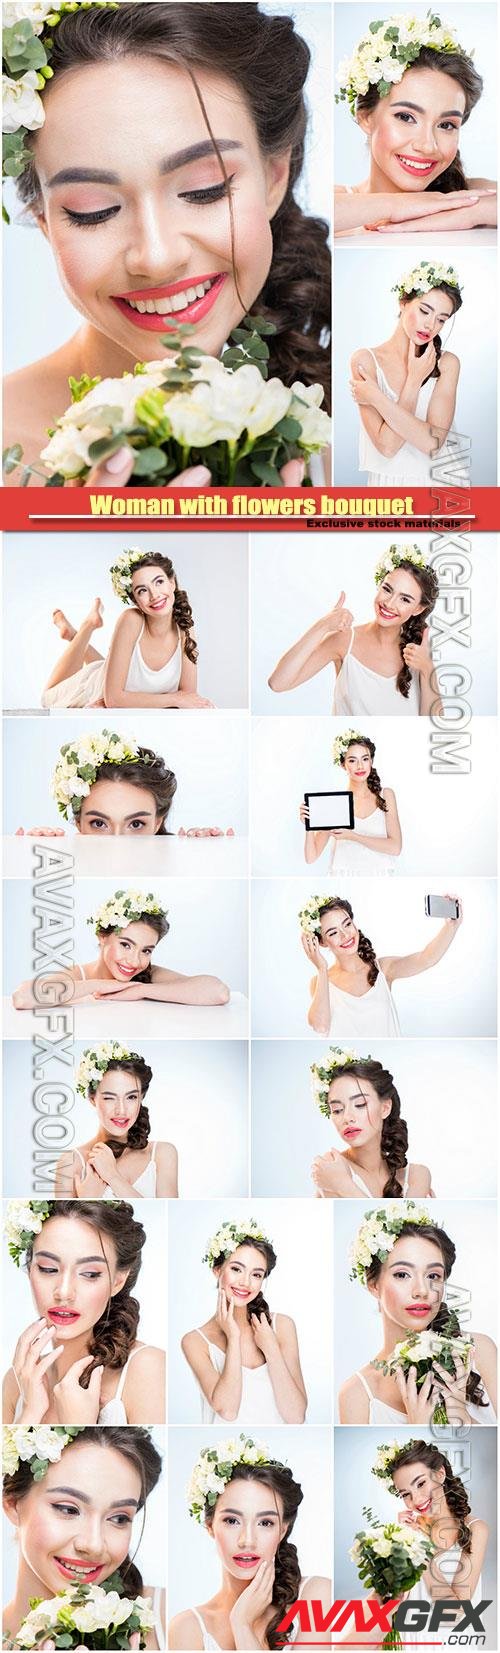 Girl with white flowers smiling